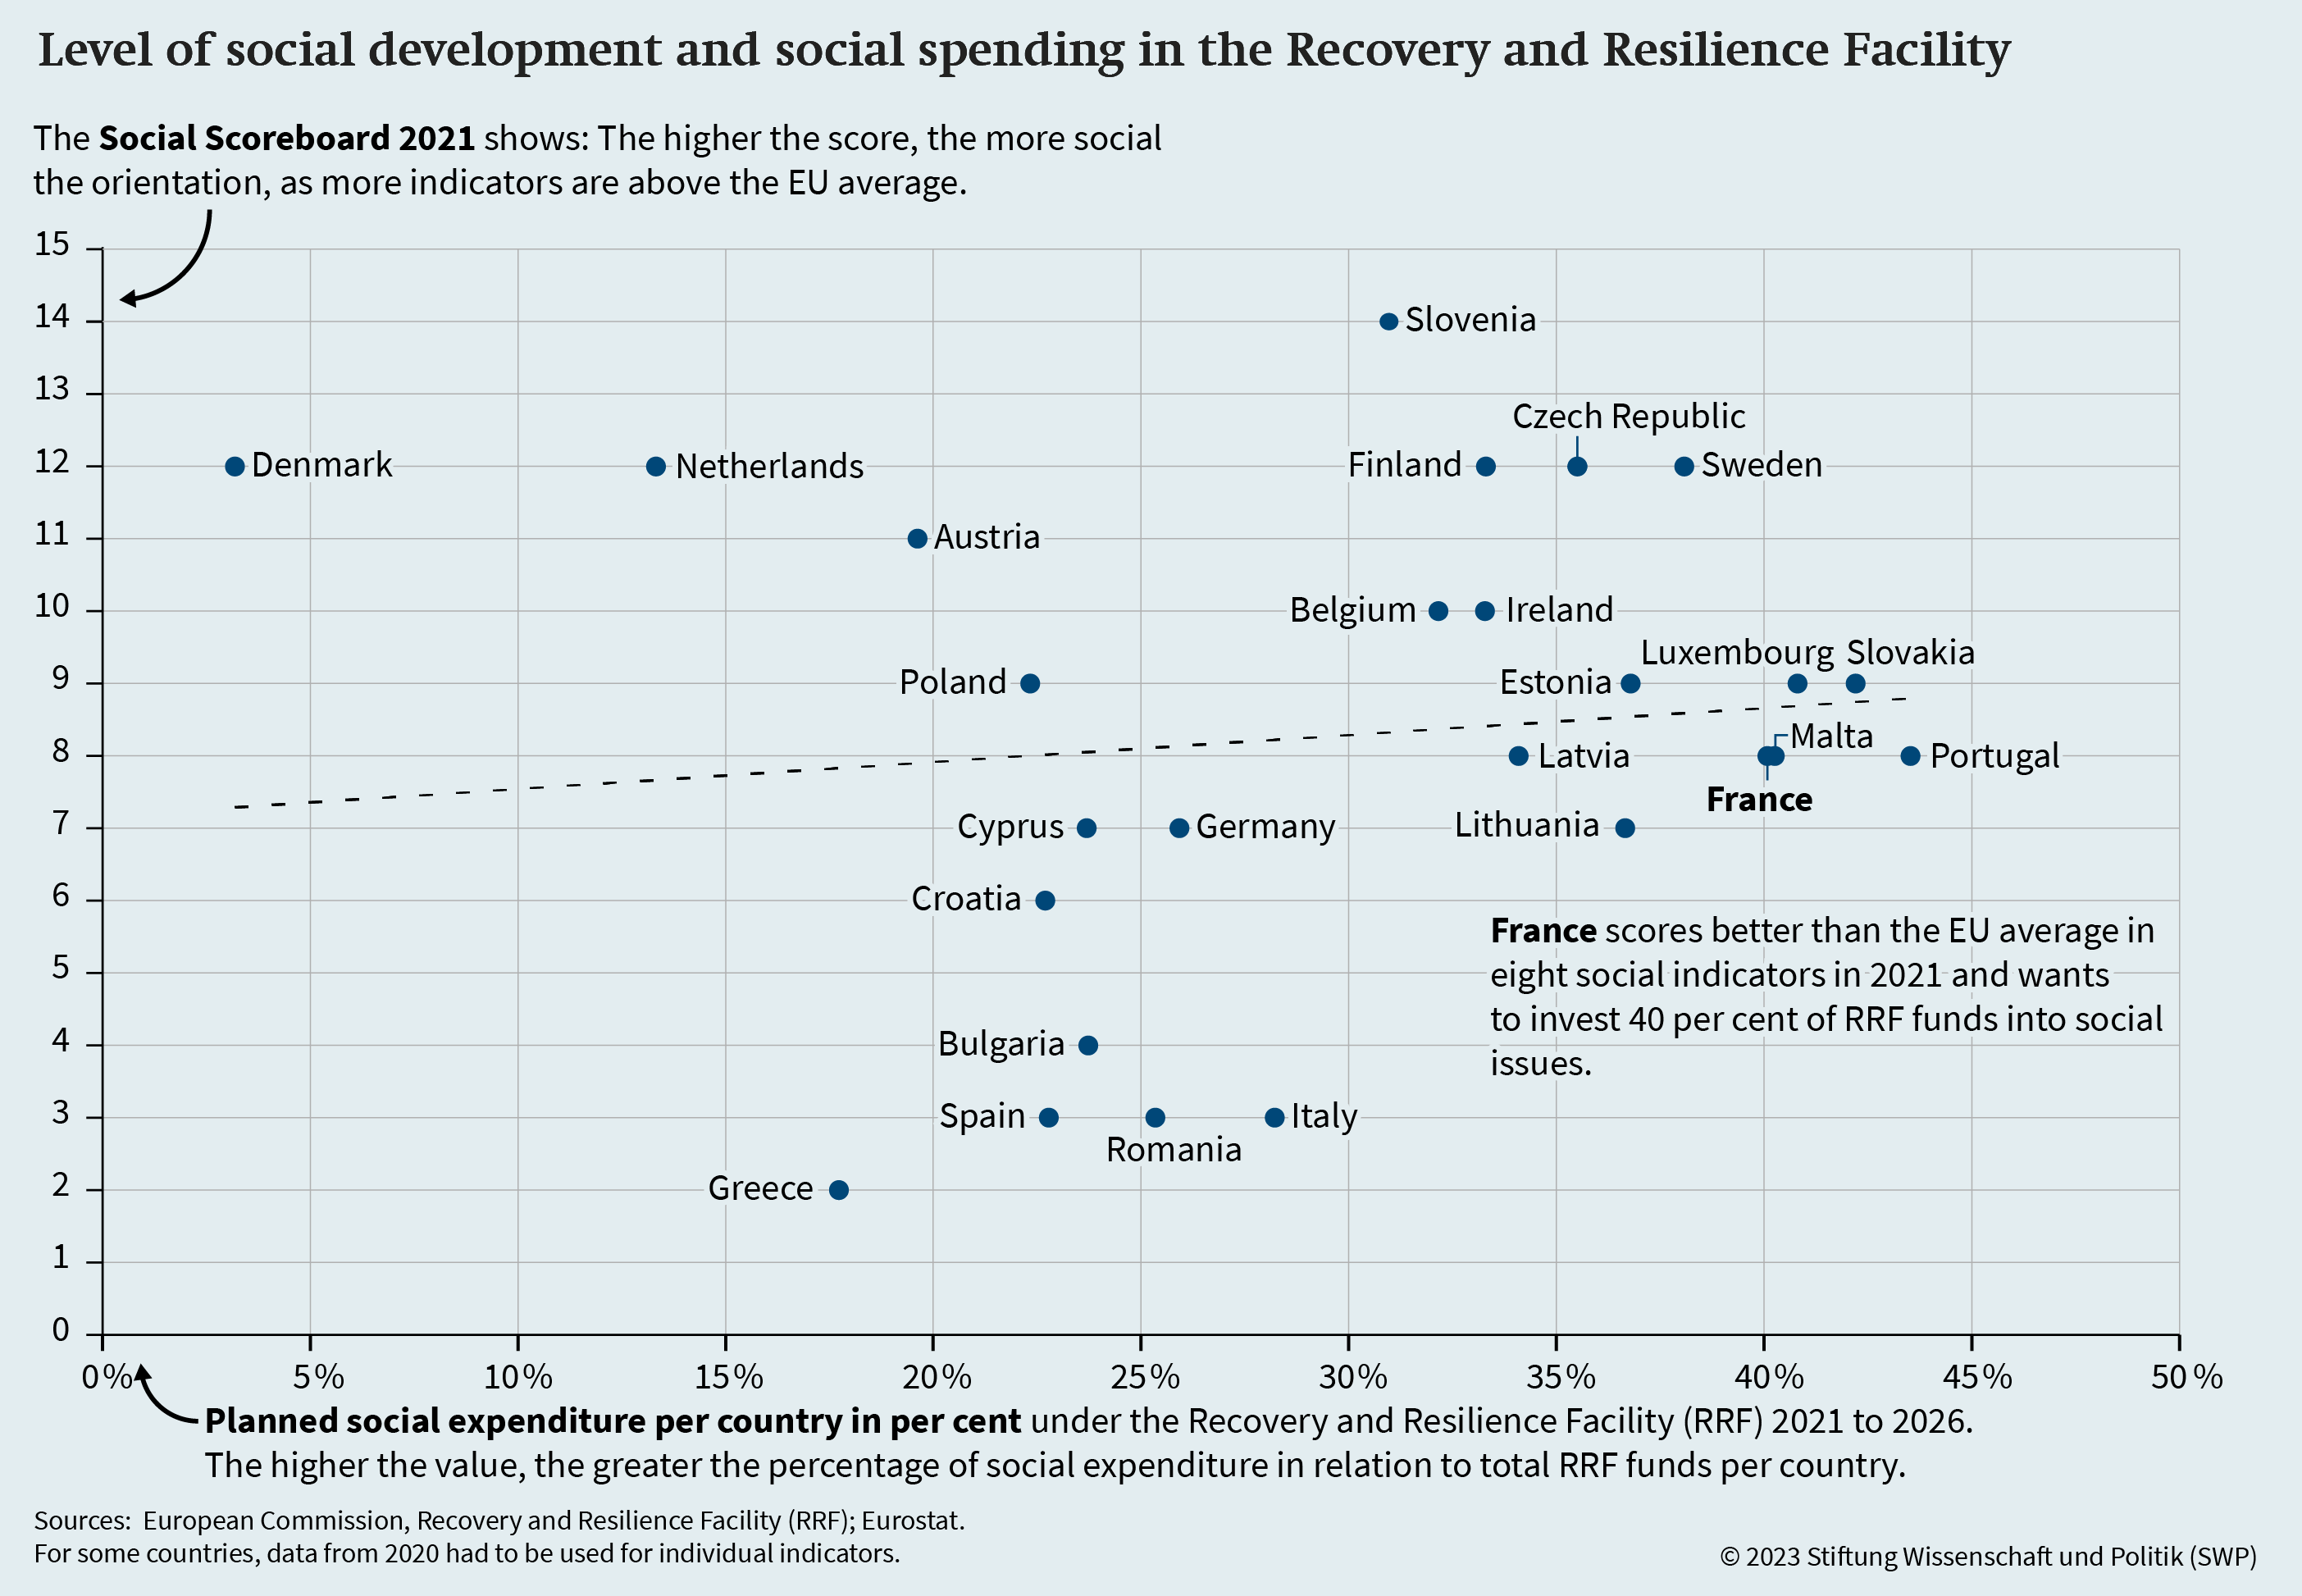 Figure 4: Level of social development and social spending in the Recovery and Resilience Facility